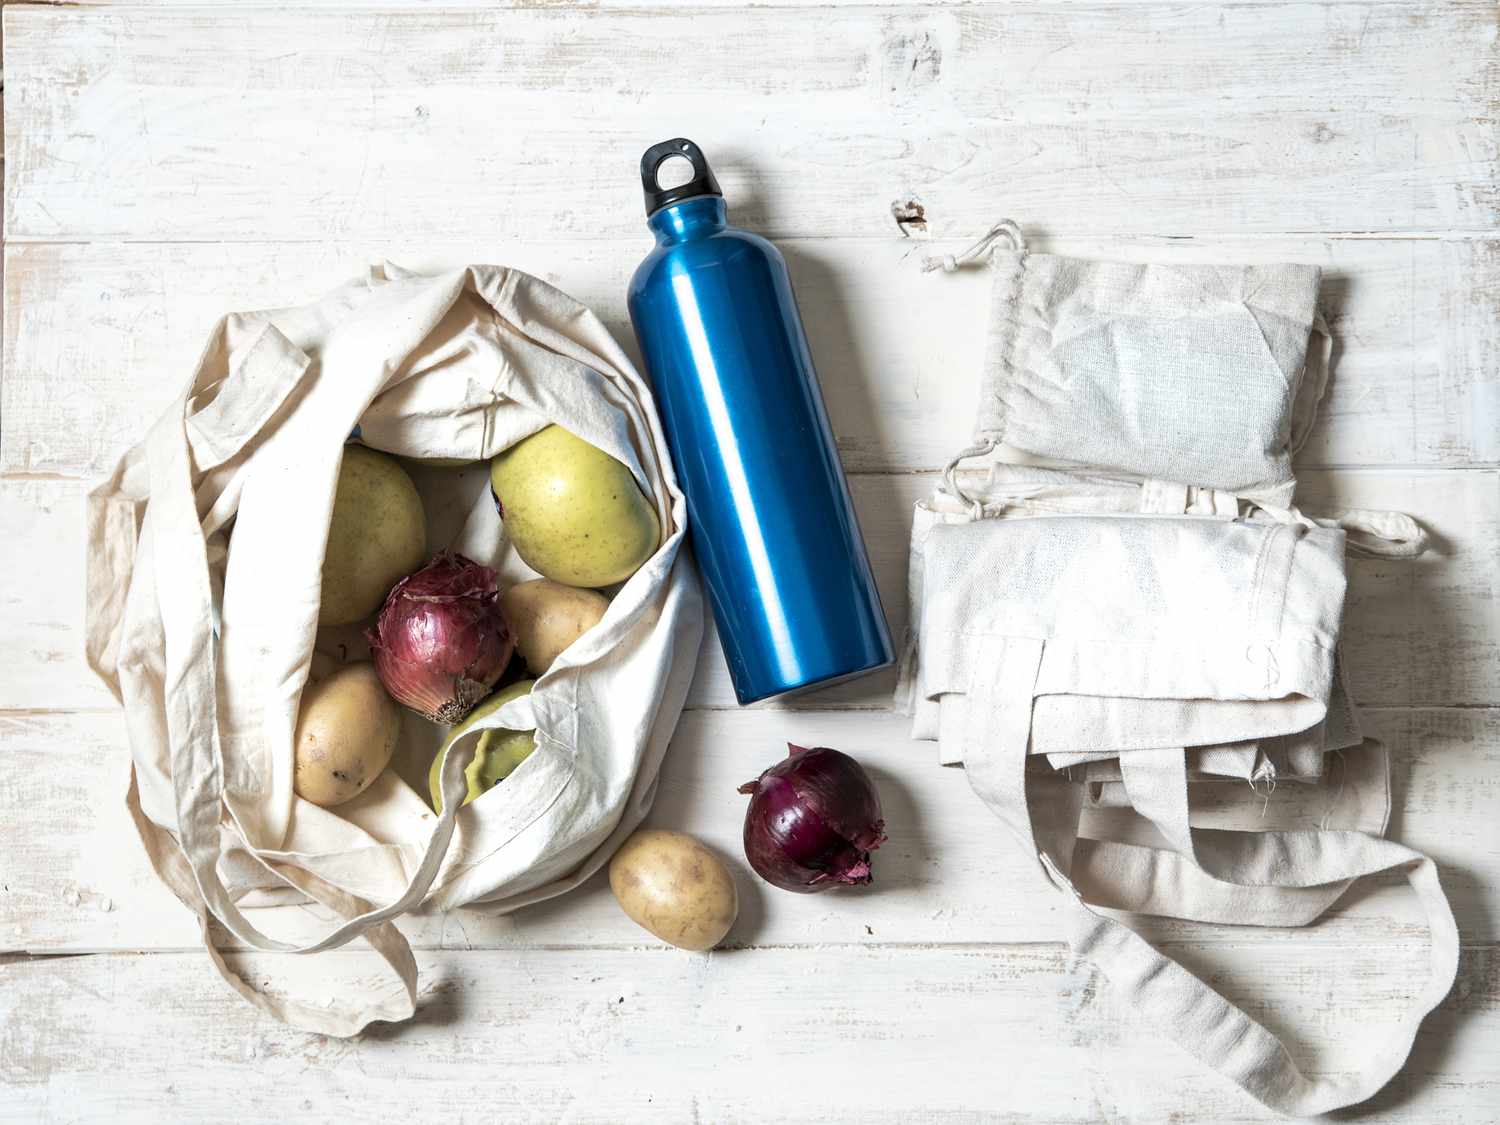 cotton shopping bags with vegetables inside and an aluminum water bottle